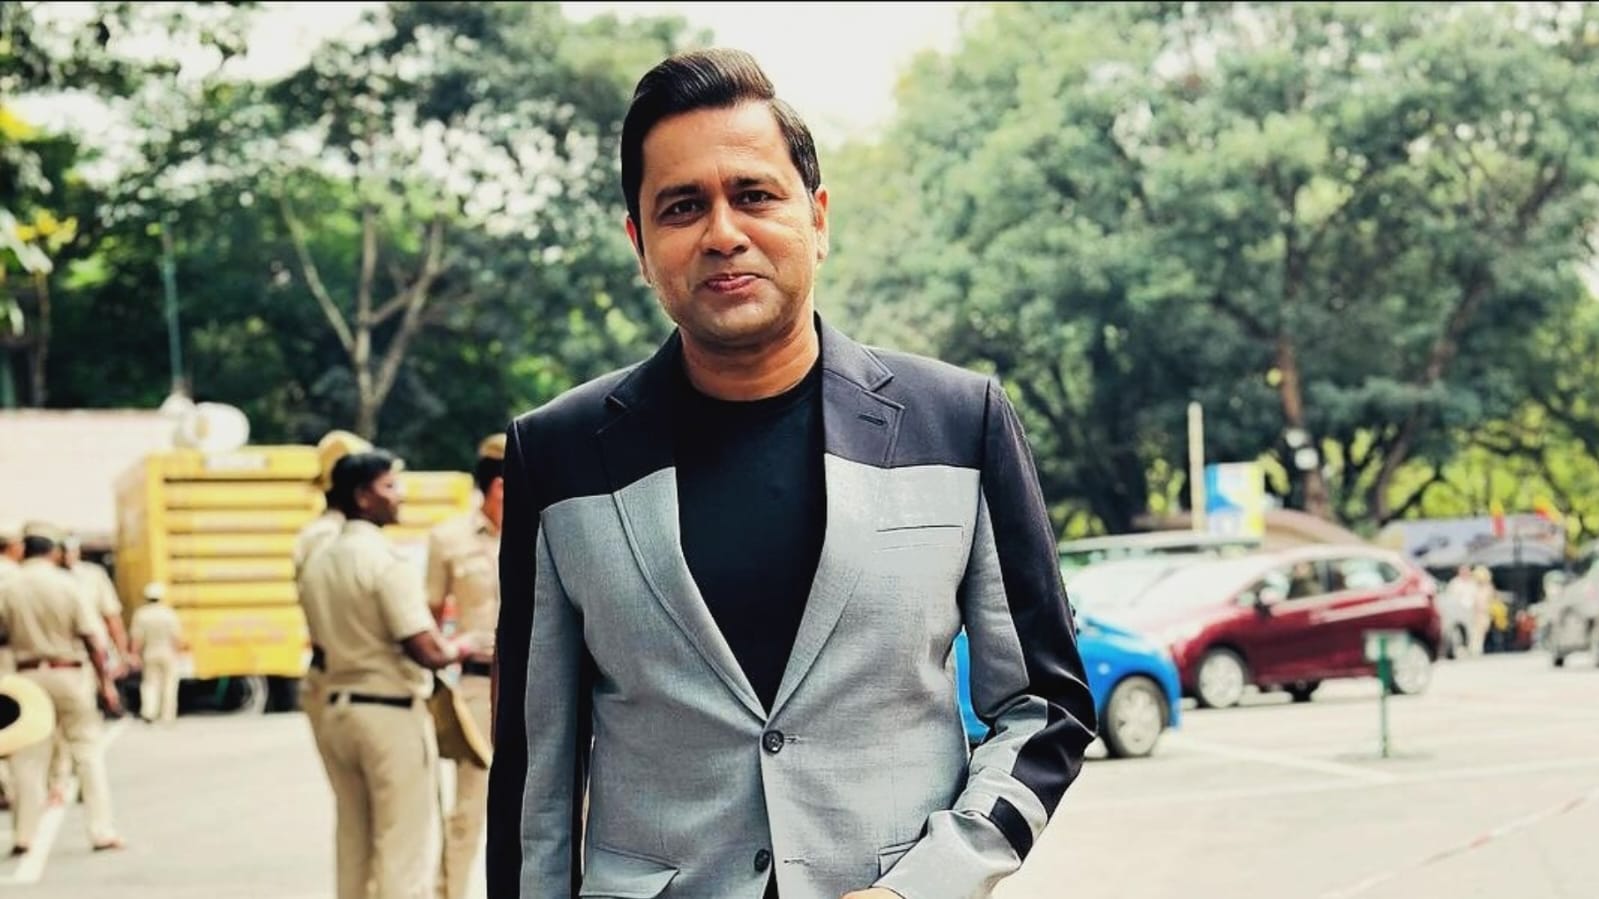 “A bad pitch should be called bad, whether ours or someone else’s”: Aakash Chopra